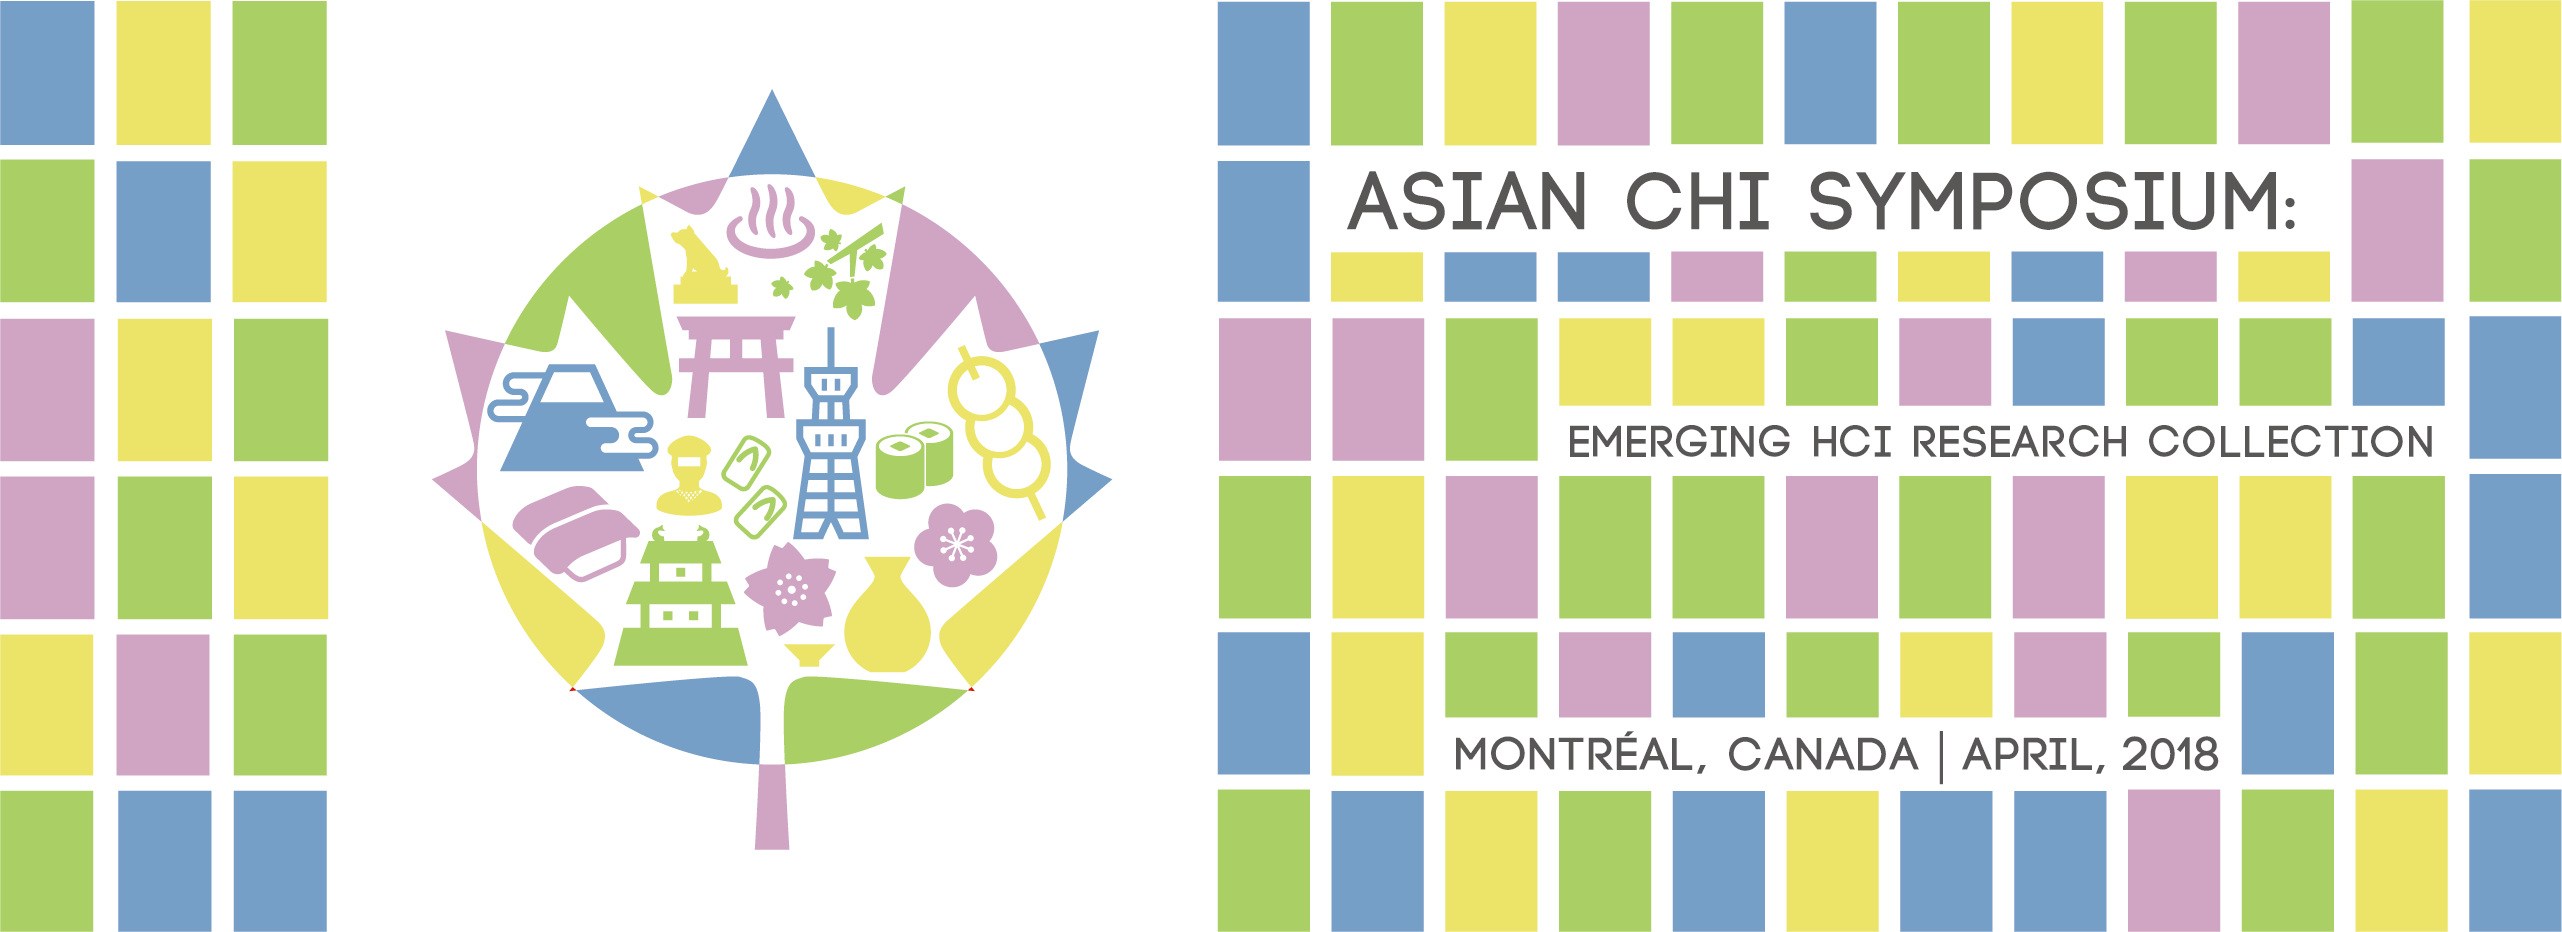 Asian CHI symposium: Emerging HCI Research Collection